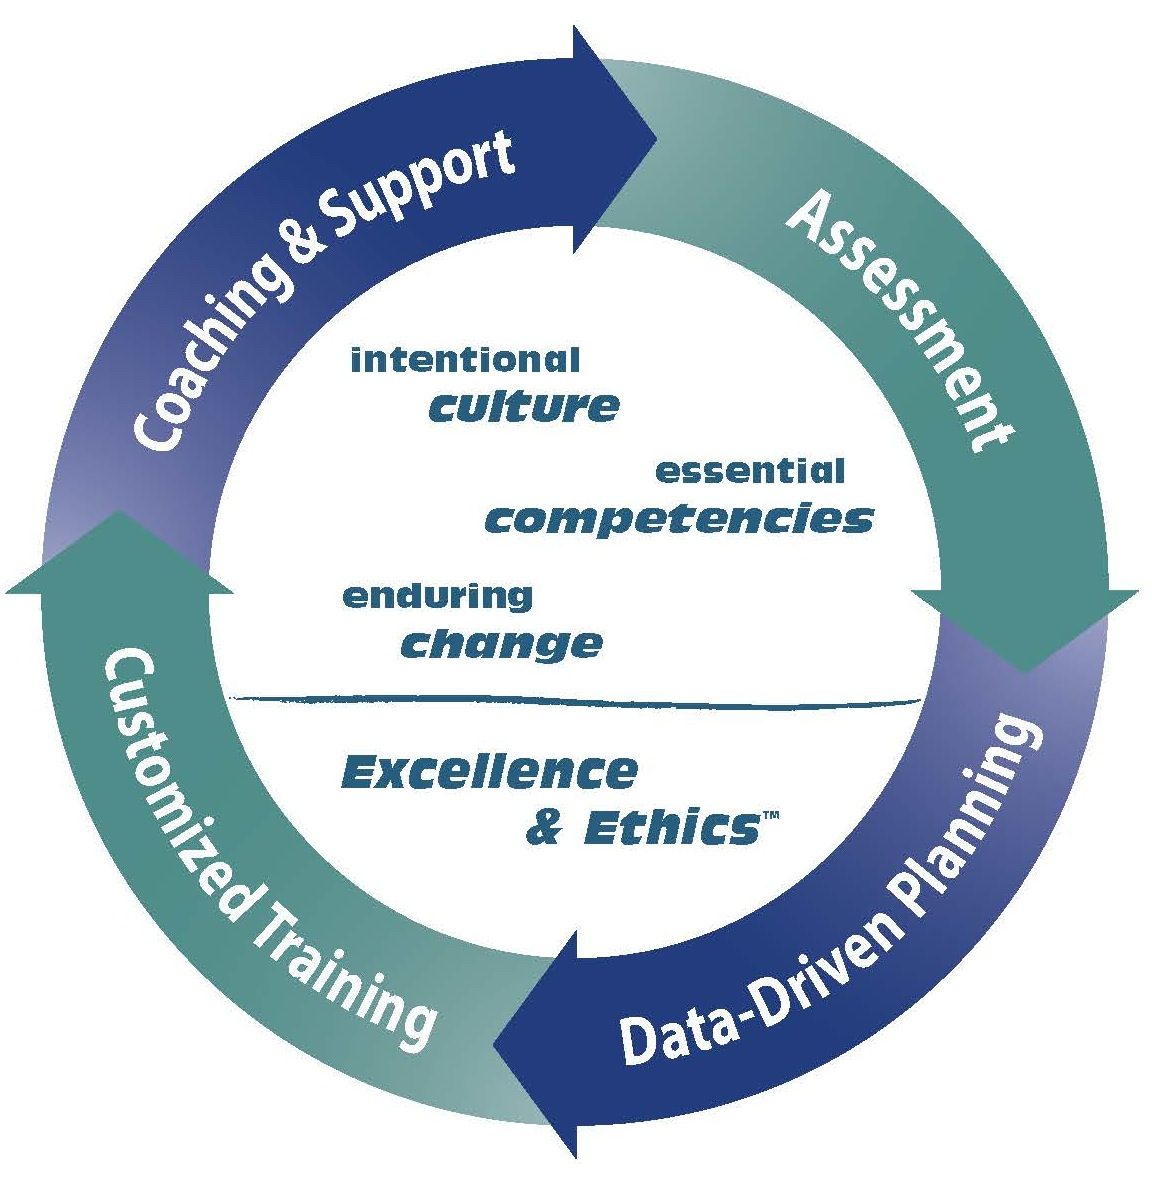 How can data improve your school's culture?